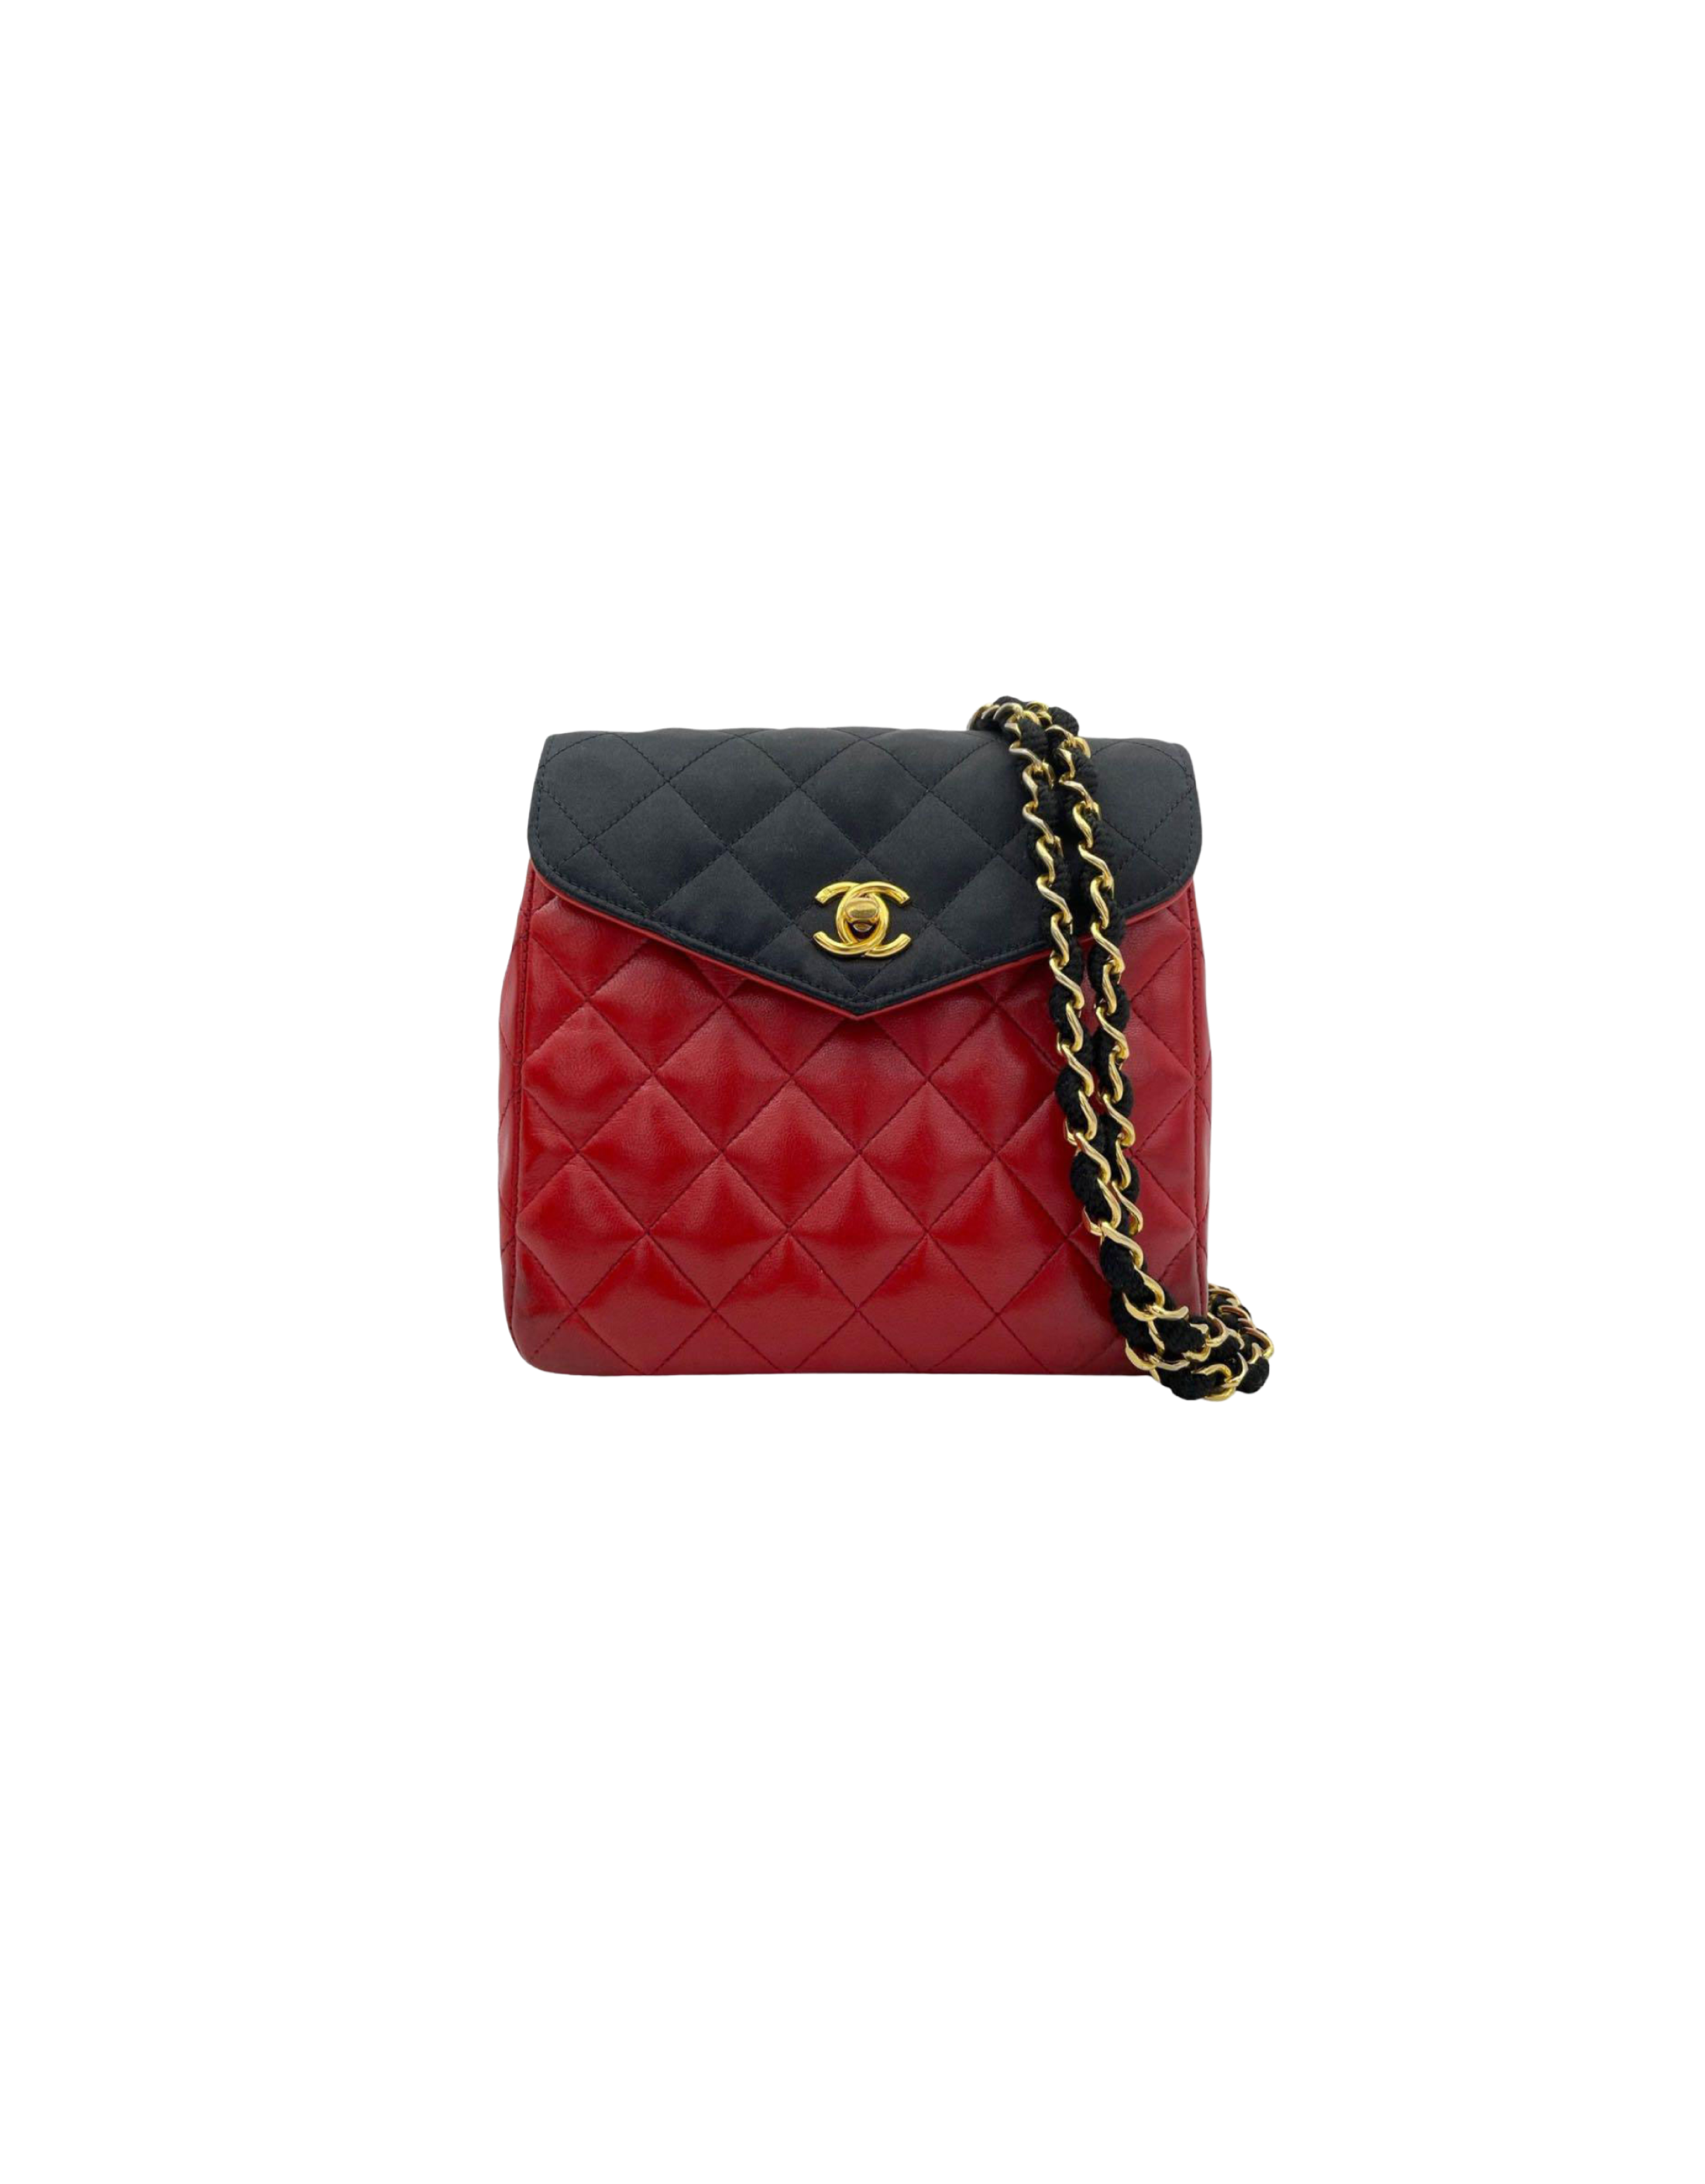 1991 Chanel Black Quilted Satin Vintage Mini Diana Classic Single